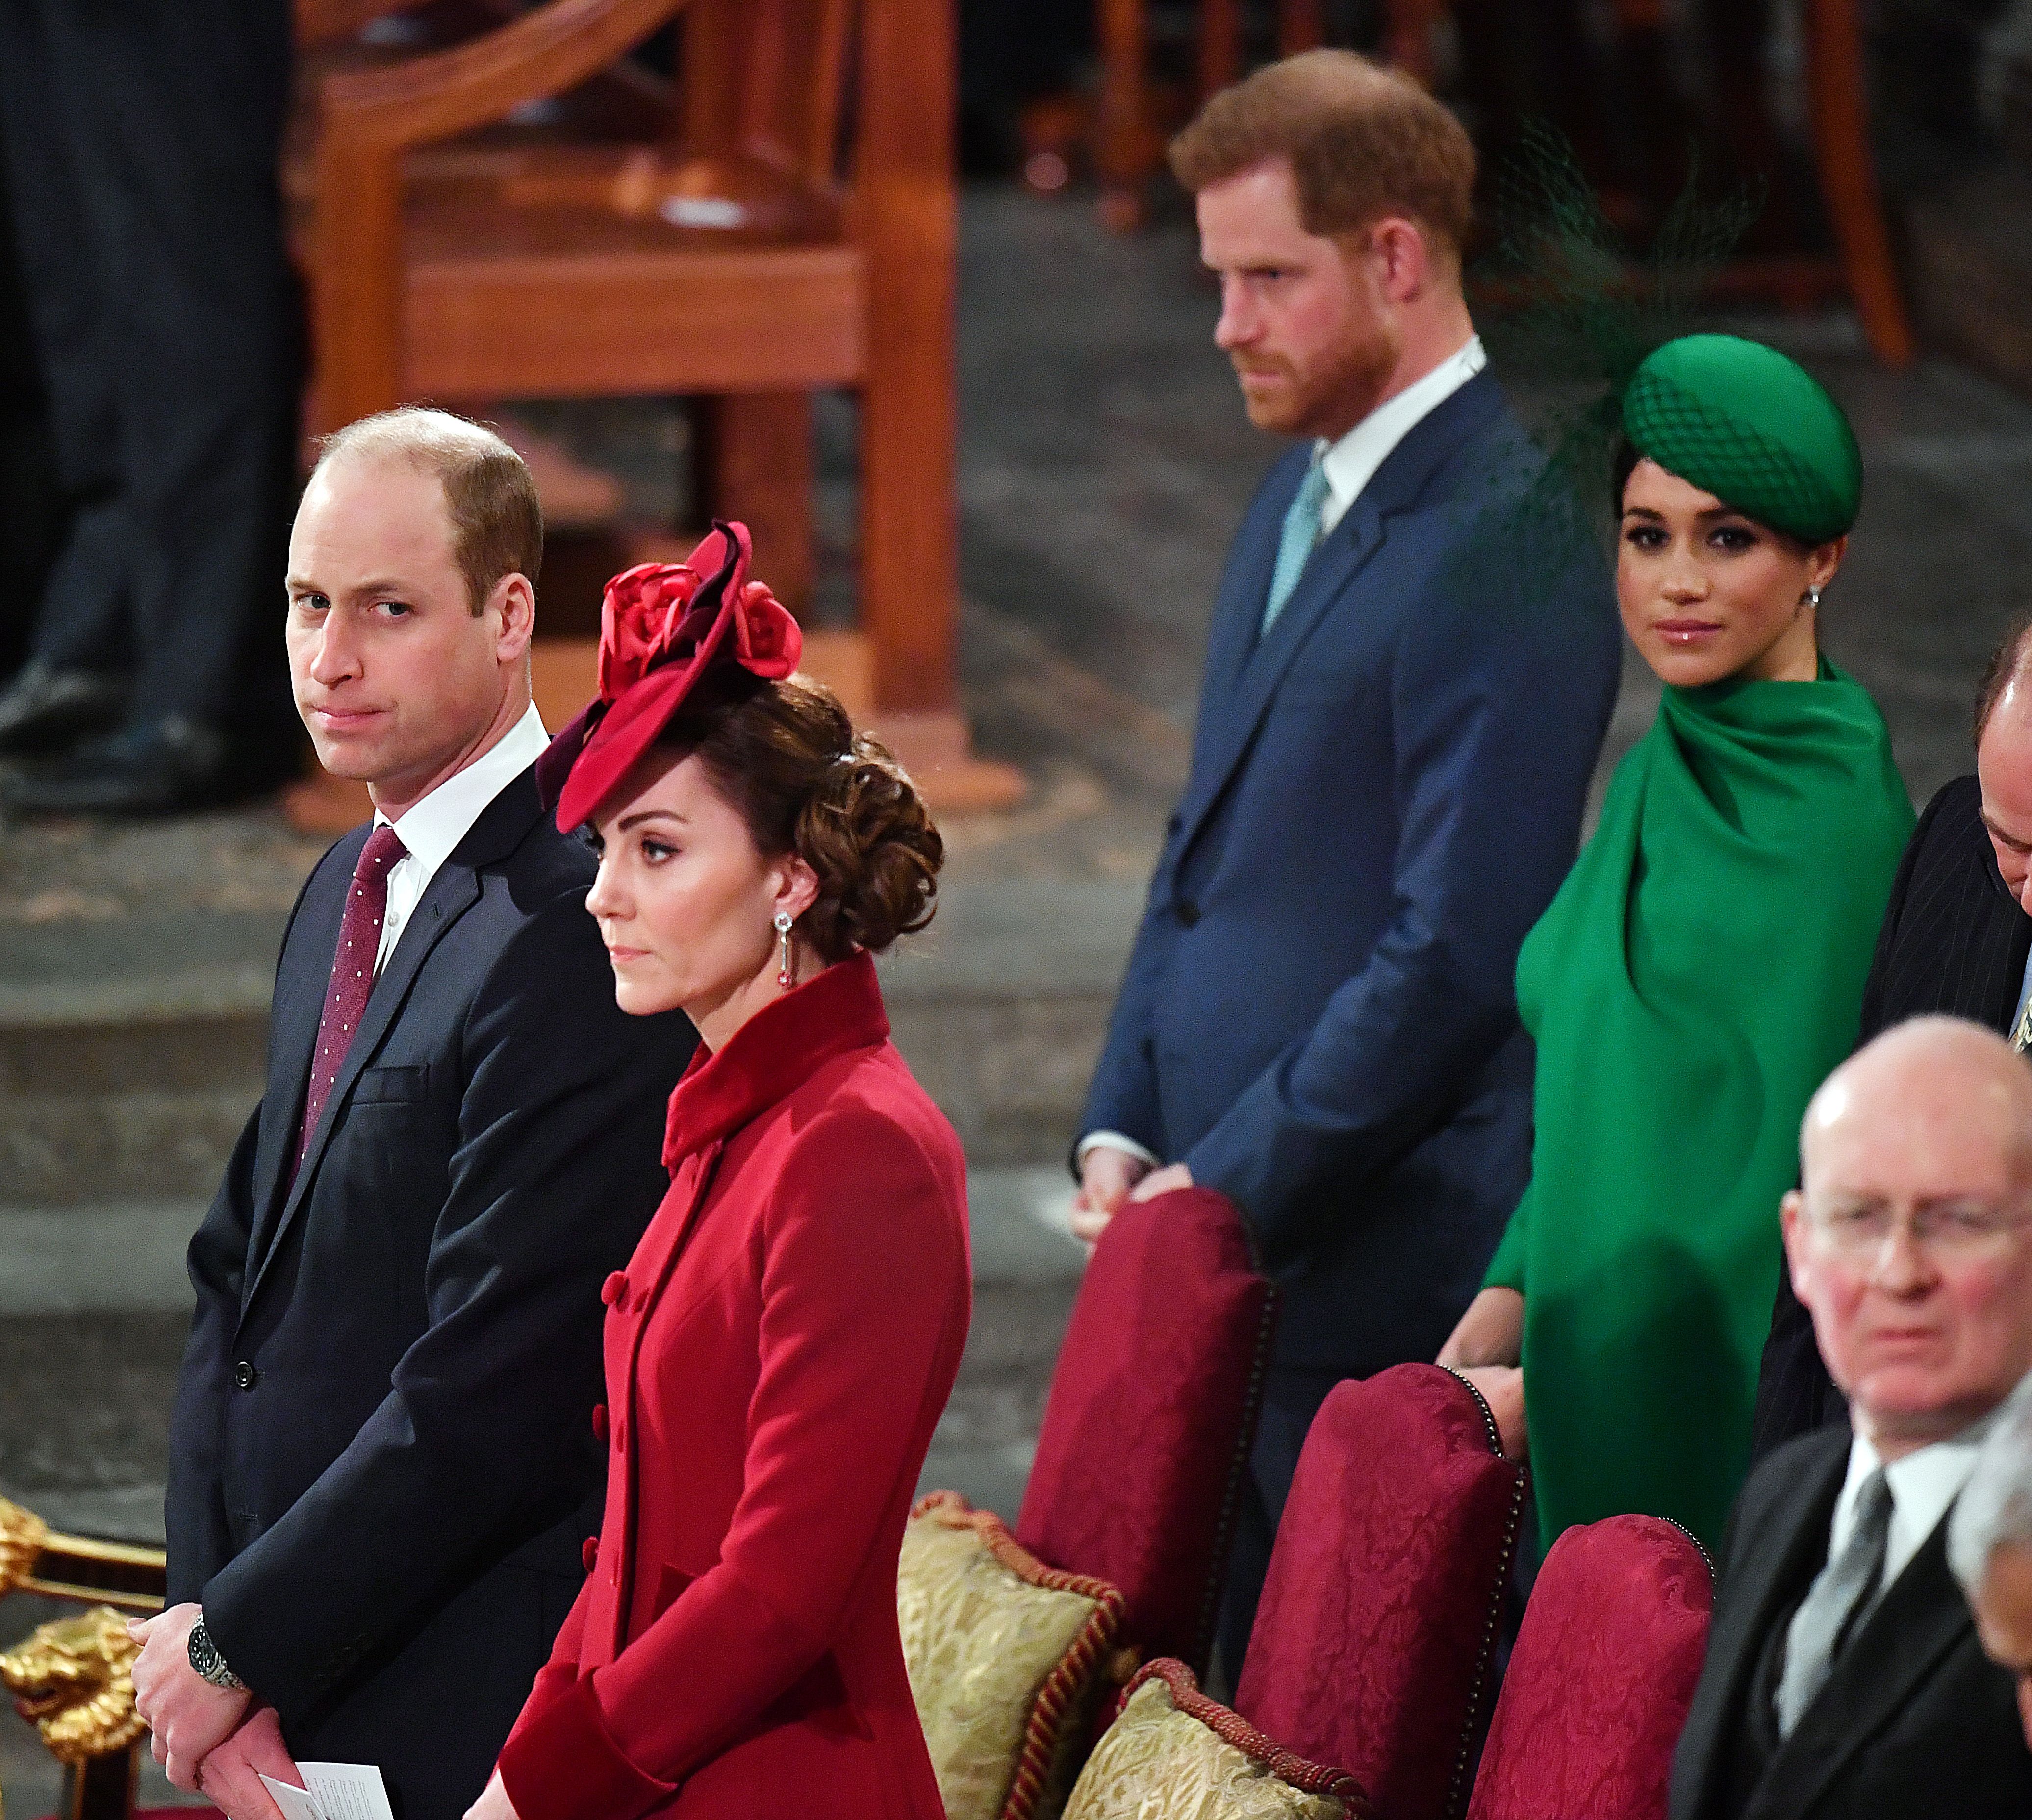 Britain's Prince Harry, Duke of Sussex, and Britain's Meghan, Duchess of Sussex sit behind Britain's Prince William, Duke of Cambridge and Britain's Catherine, Duchess of Cambridge inside Westminster Abbey as they attend the annual Commonwealth Service in London on March 9, 2020. | Source: Getty Images